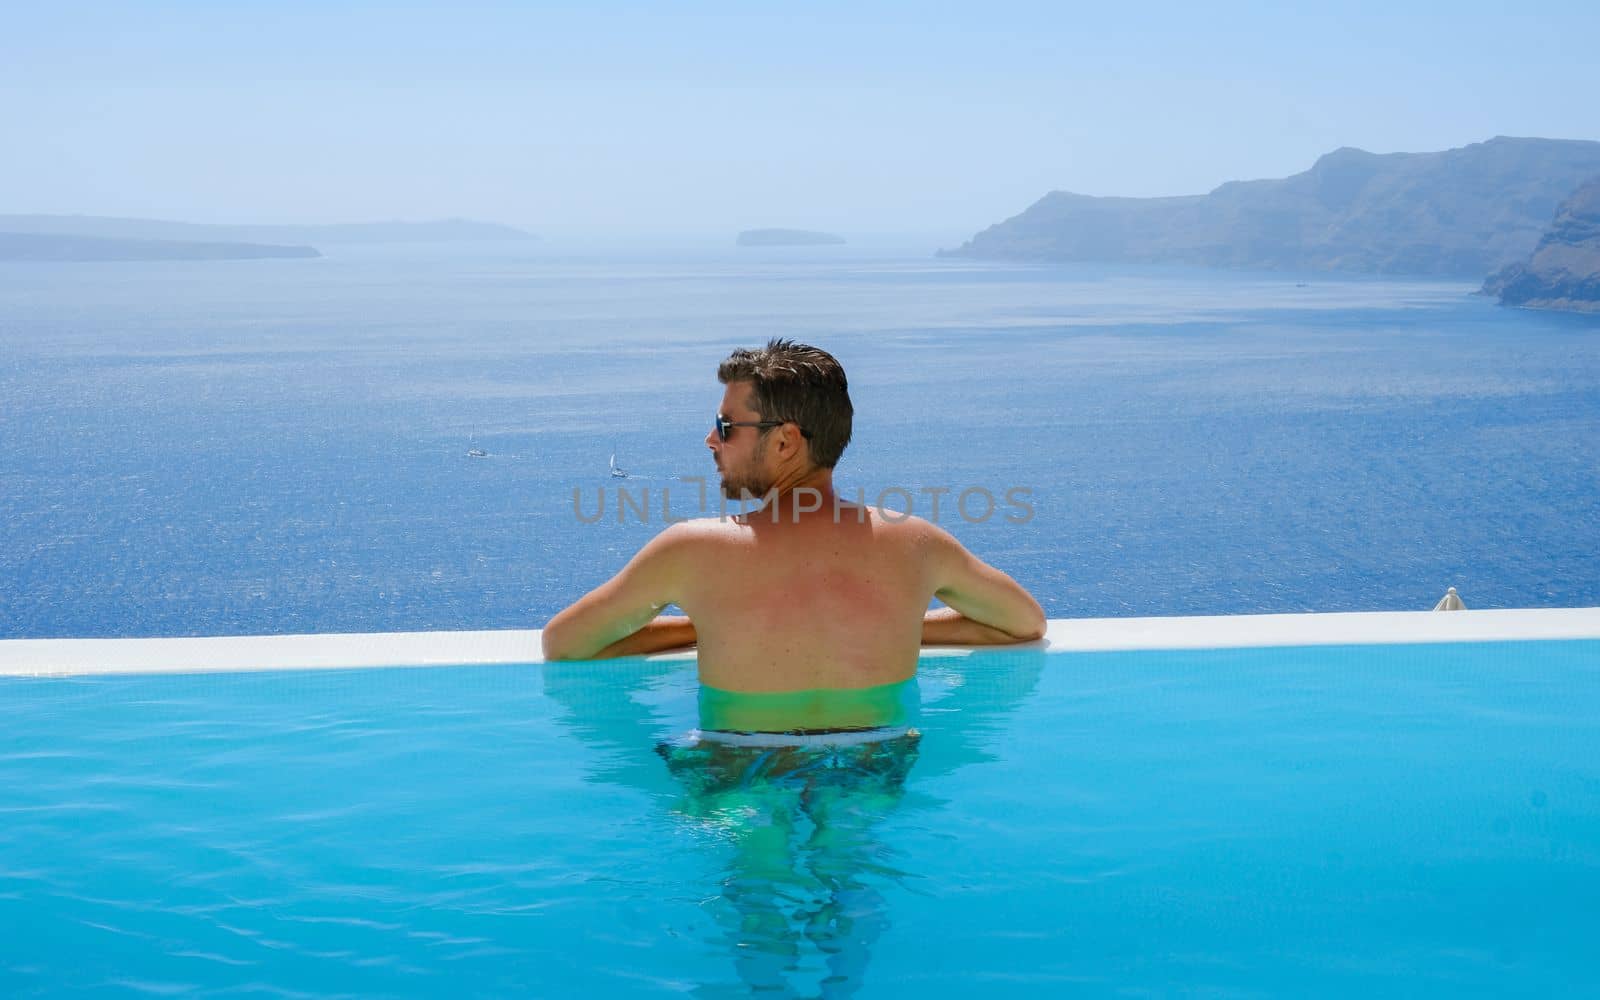 young man relaxing in infinity swimming during vacation at Santorini, swimming pool looking out over the Caldera ocean of Santorini, Oia Greece, Greek Island Aegean Cyclades luxury vacation.